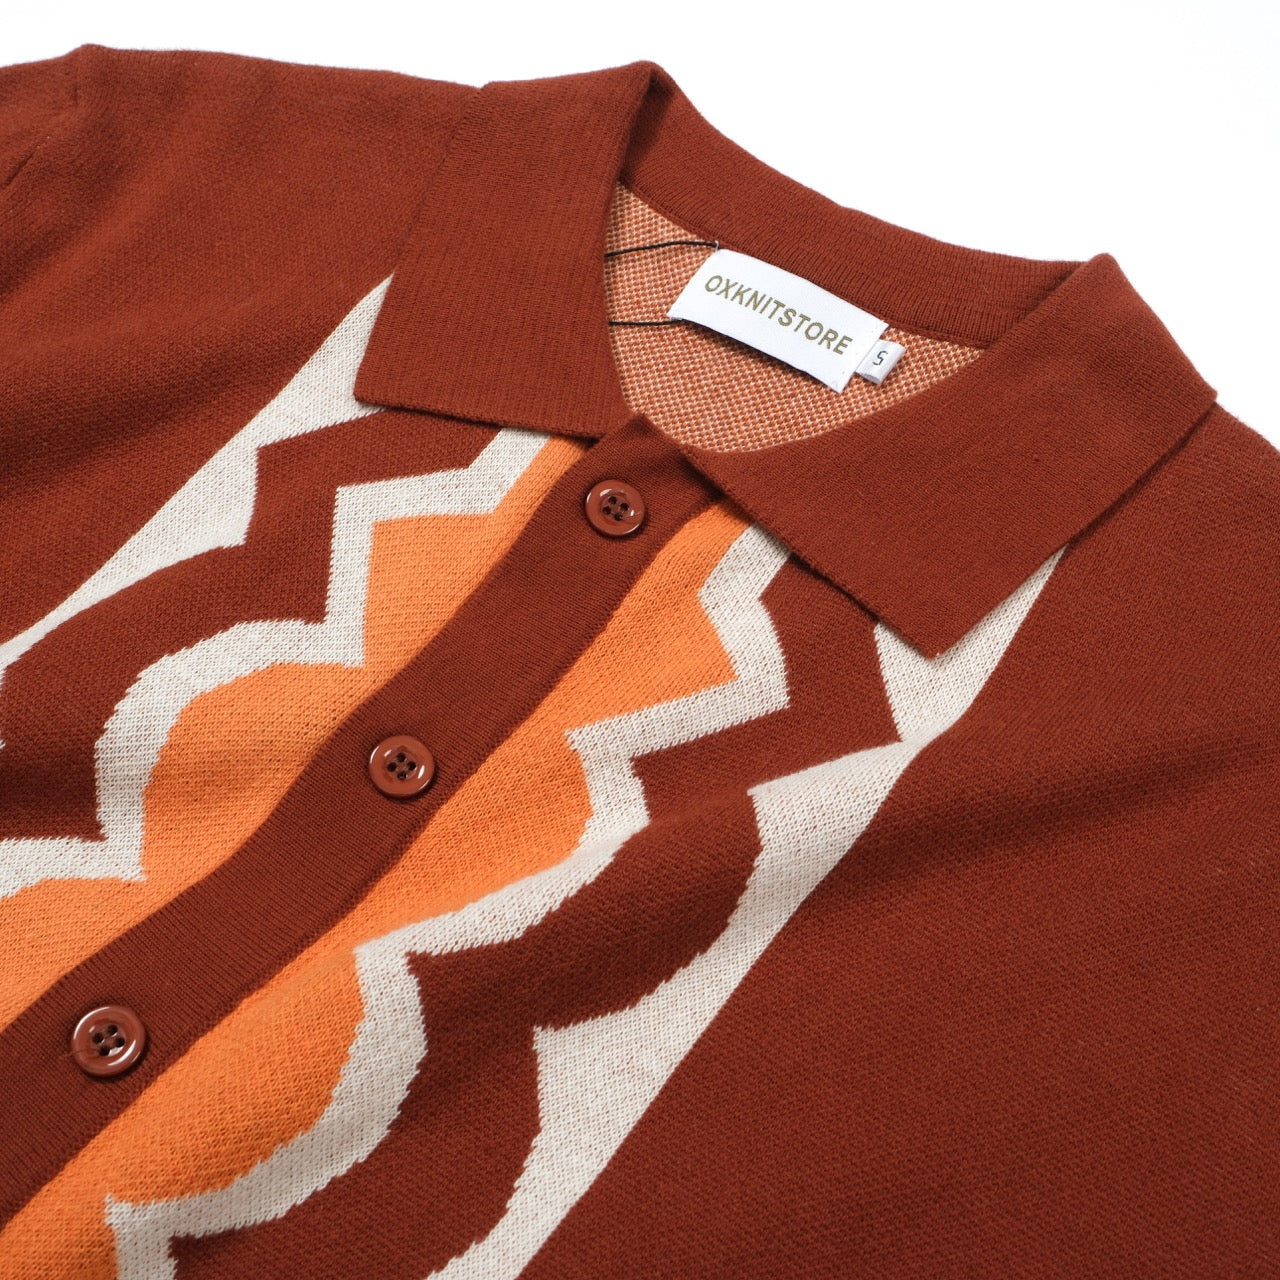 OXKNIT Men Vintage Clothing 1960s Mod Style Casual Brown & Orange Knitted Retro Polo 